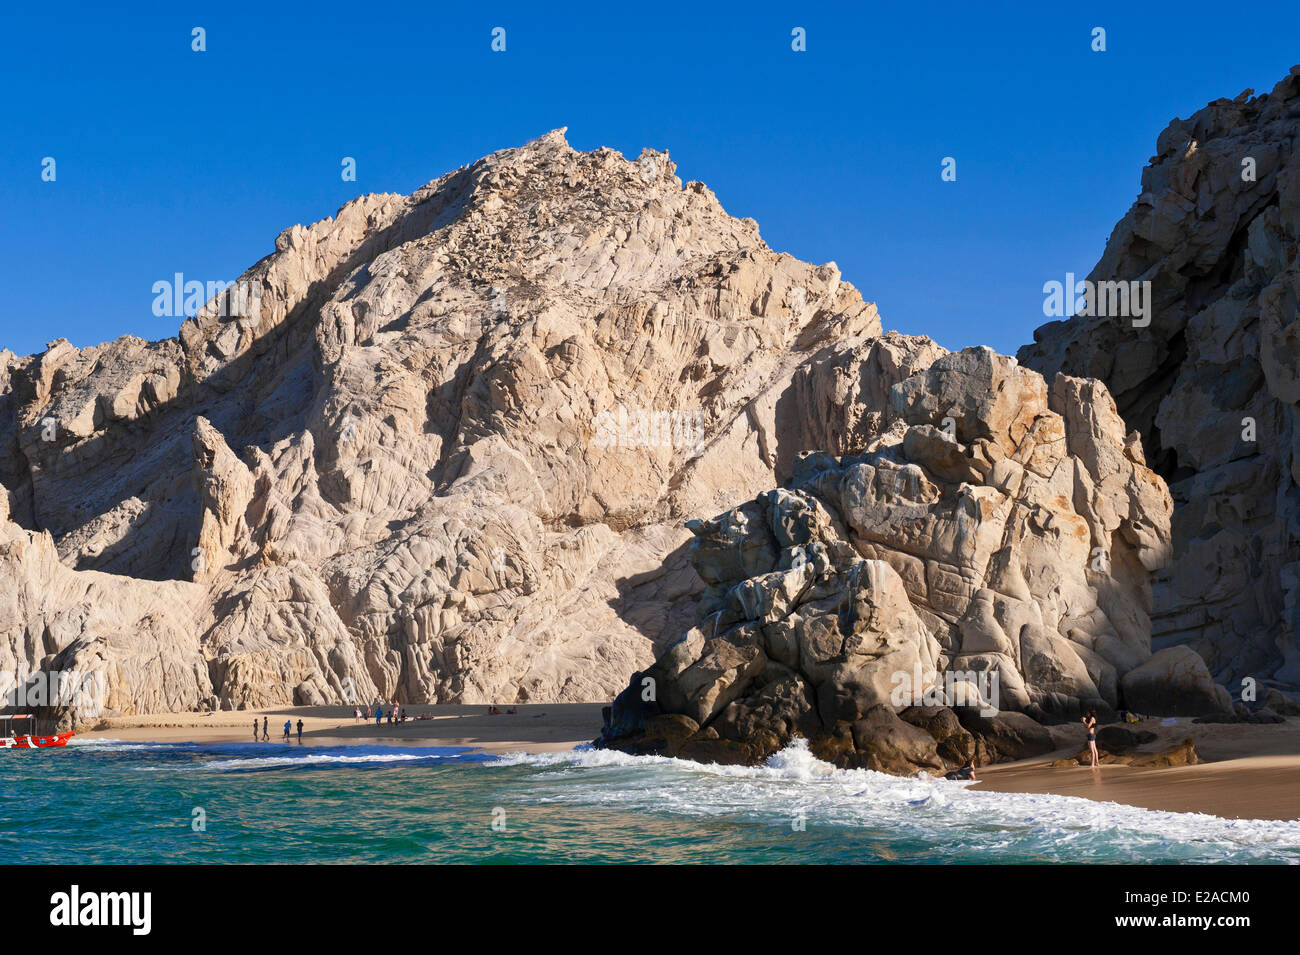 Mexico, Baja California Sur State, Sea of Cortez, listed as World Heritage by UNESCO, Cabo San Lucas sea resort, Lands End Stock Photo